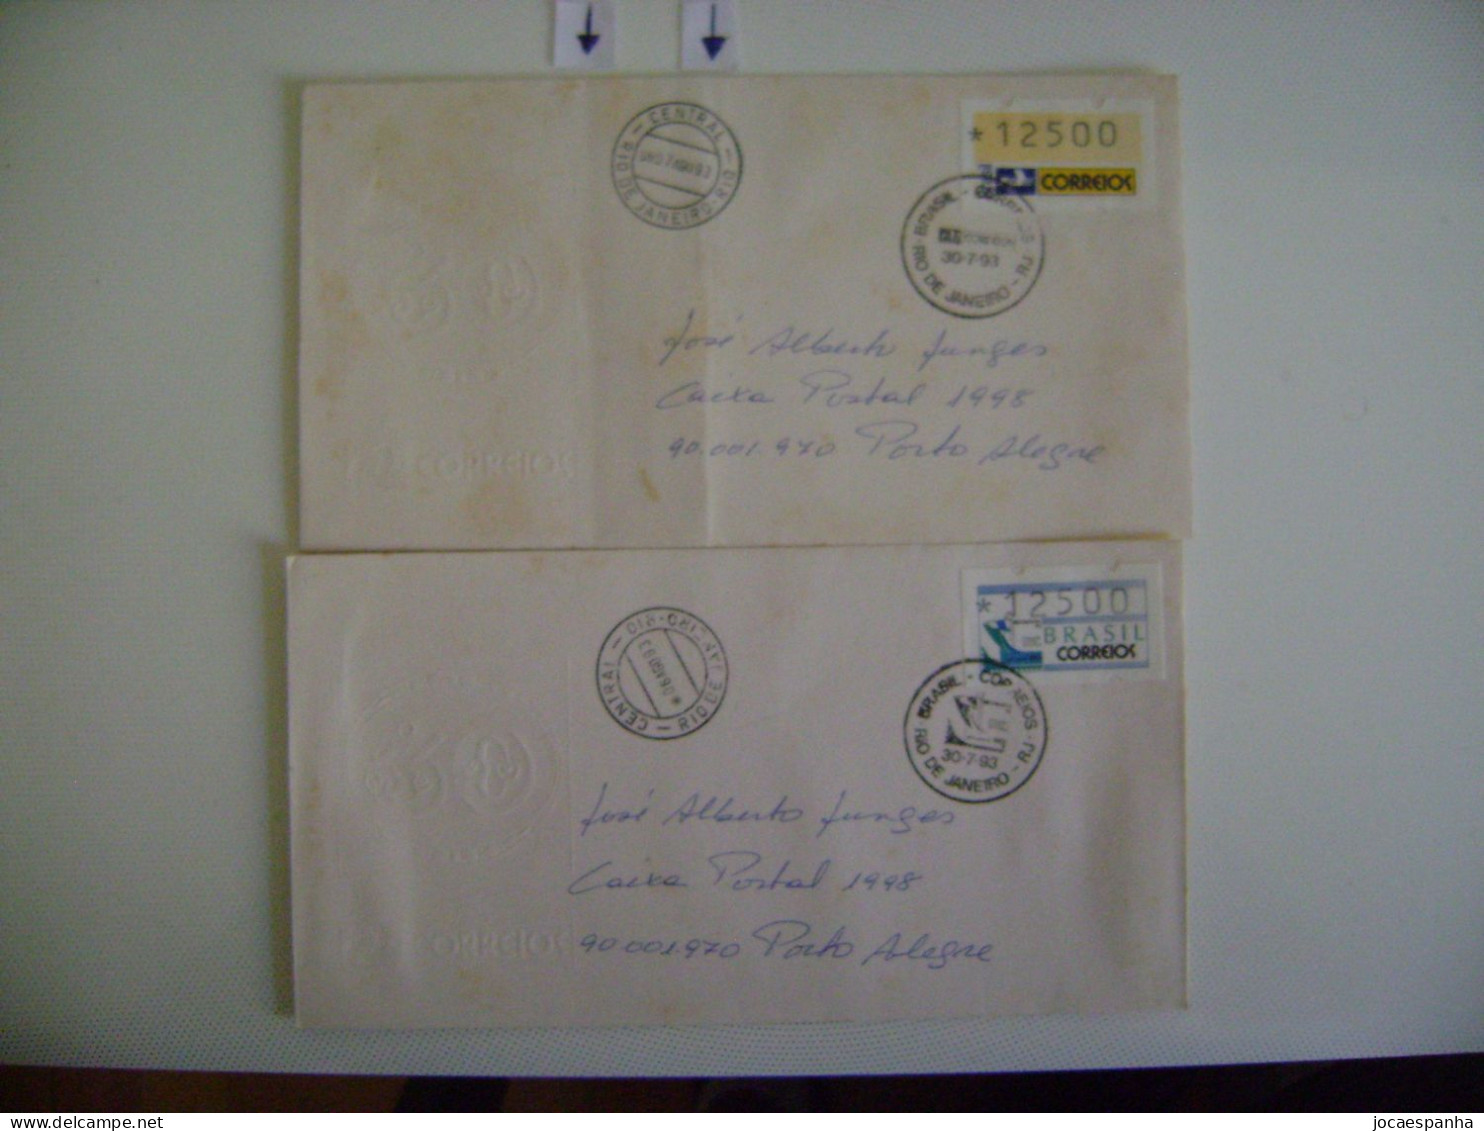 BRAZIL / BRASIL  - FOUR ENVELOPES CIRCULATED WITH AUTOMATED STAMPS IN 1993 IN THE STATE - Automatenmarken (Frama)